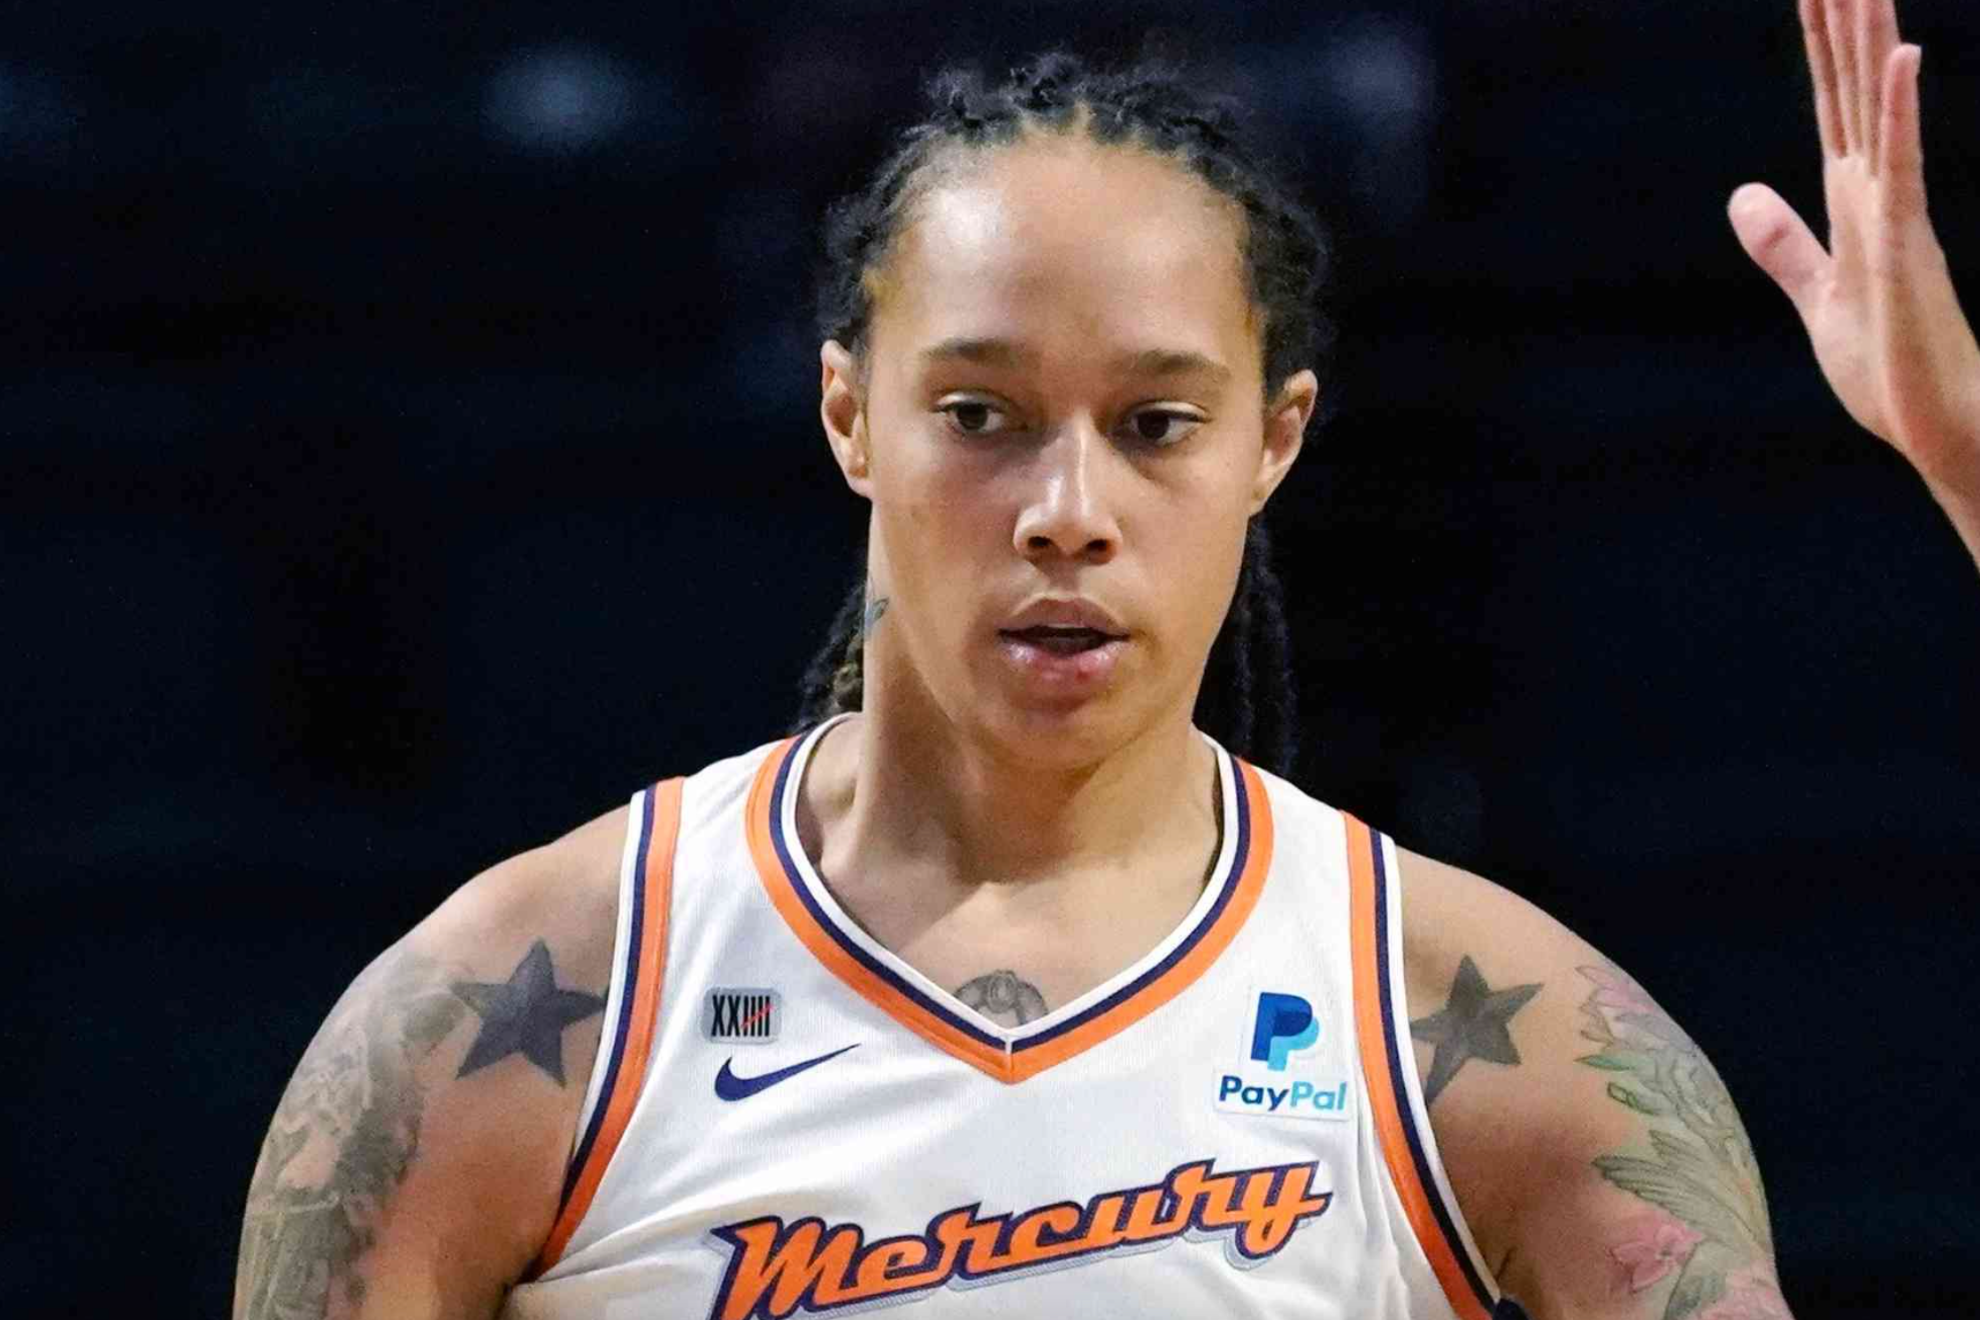 Brittney Griner surprises with life-changing announcement that makes wife Cherelle very happy